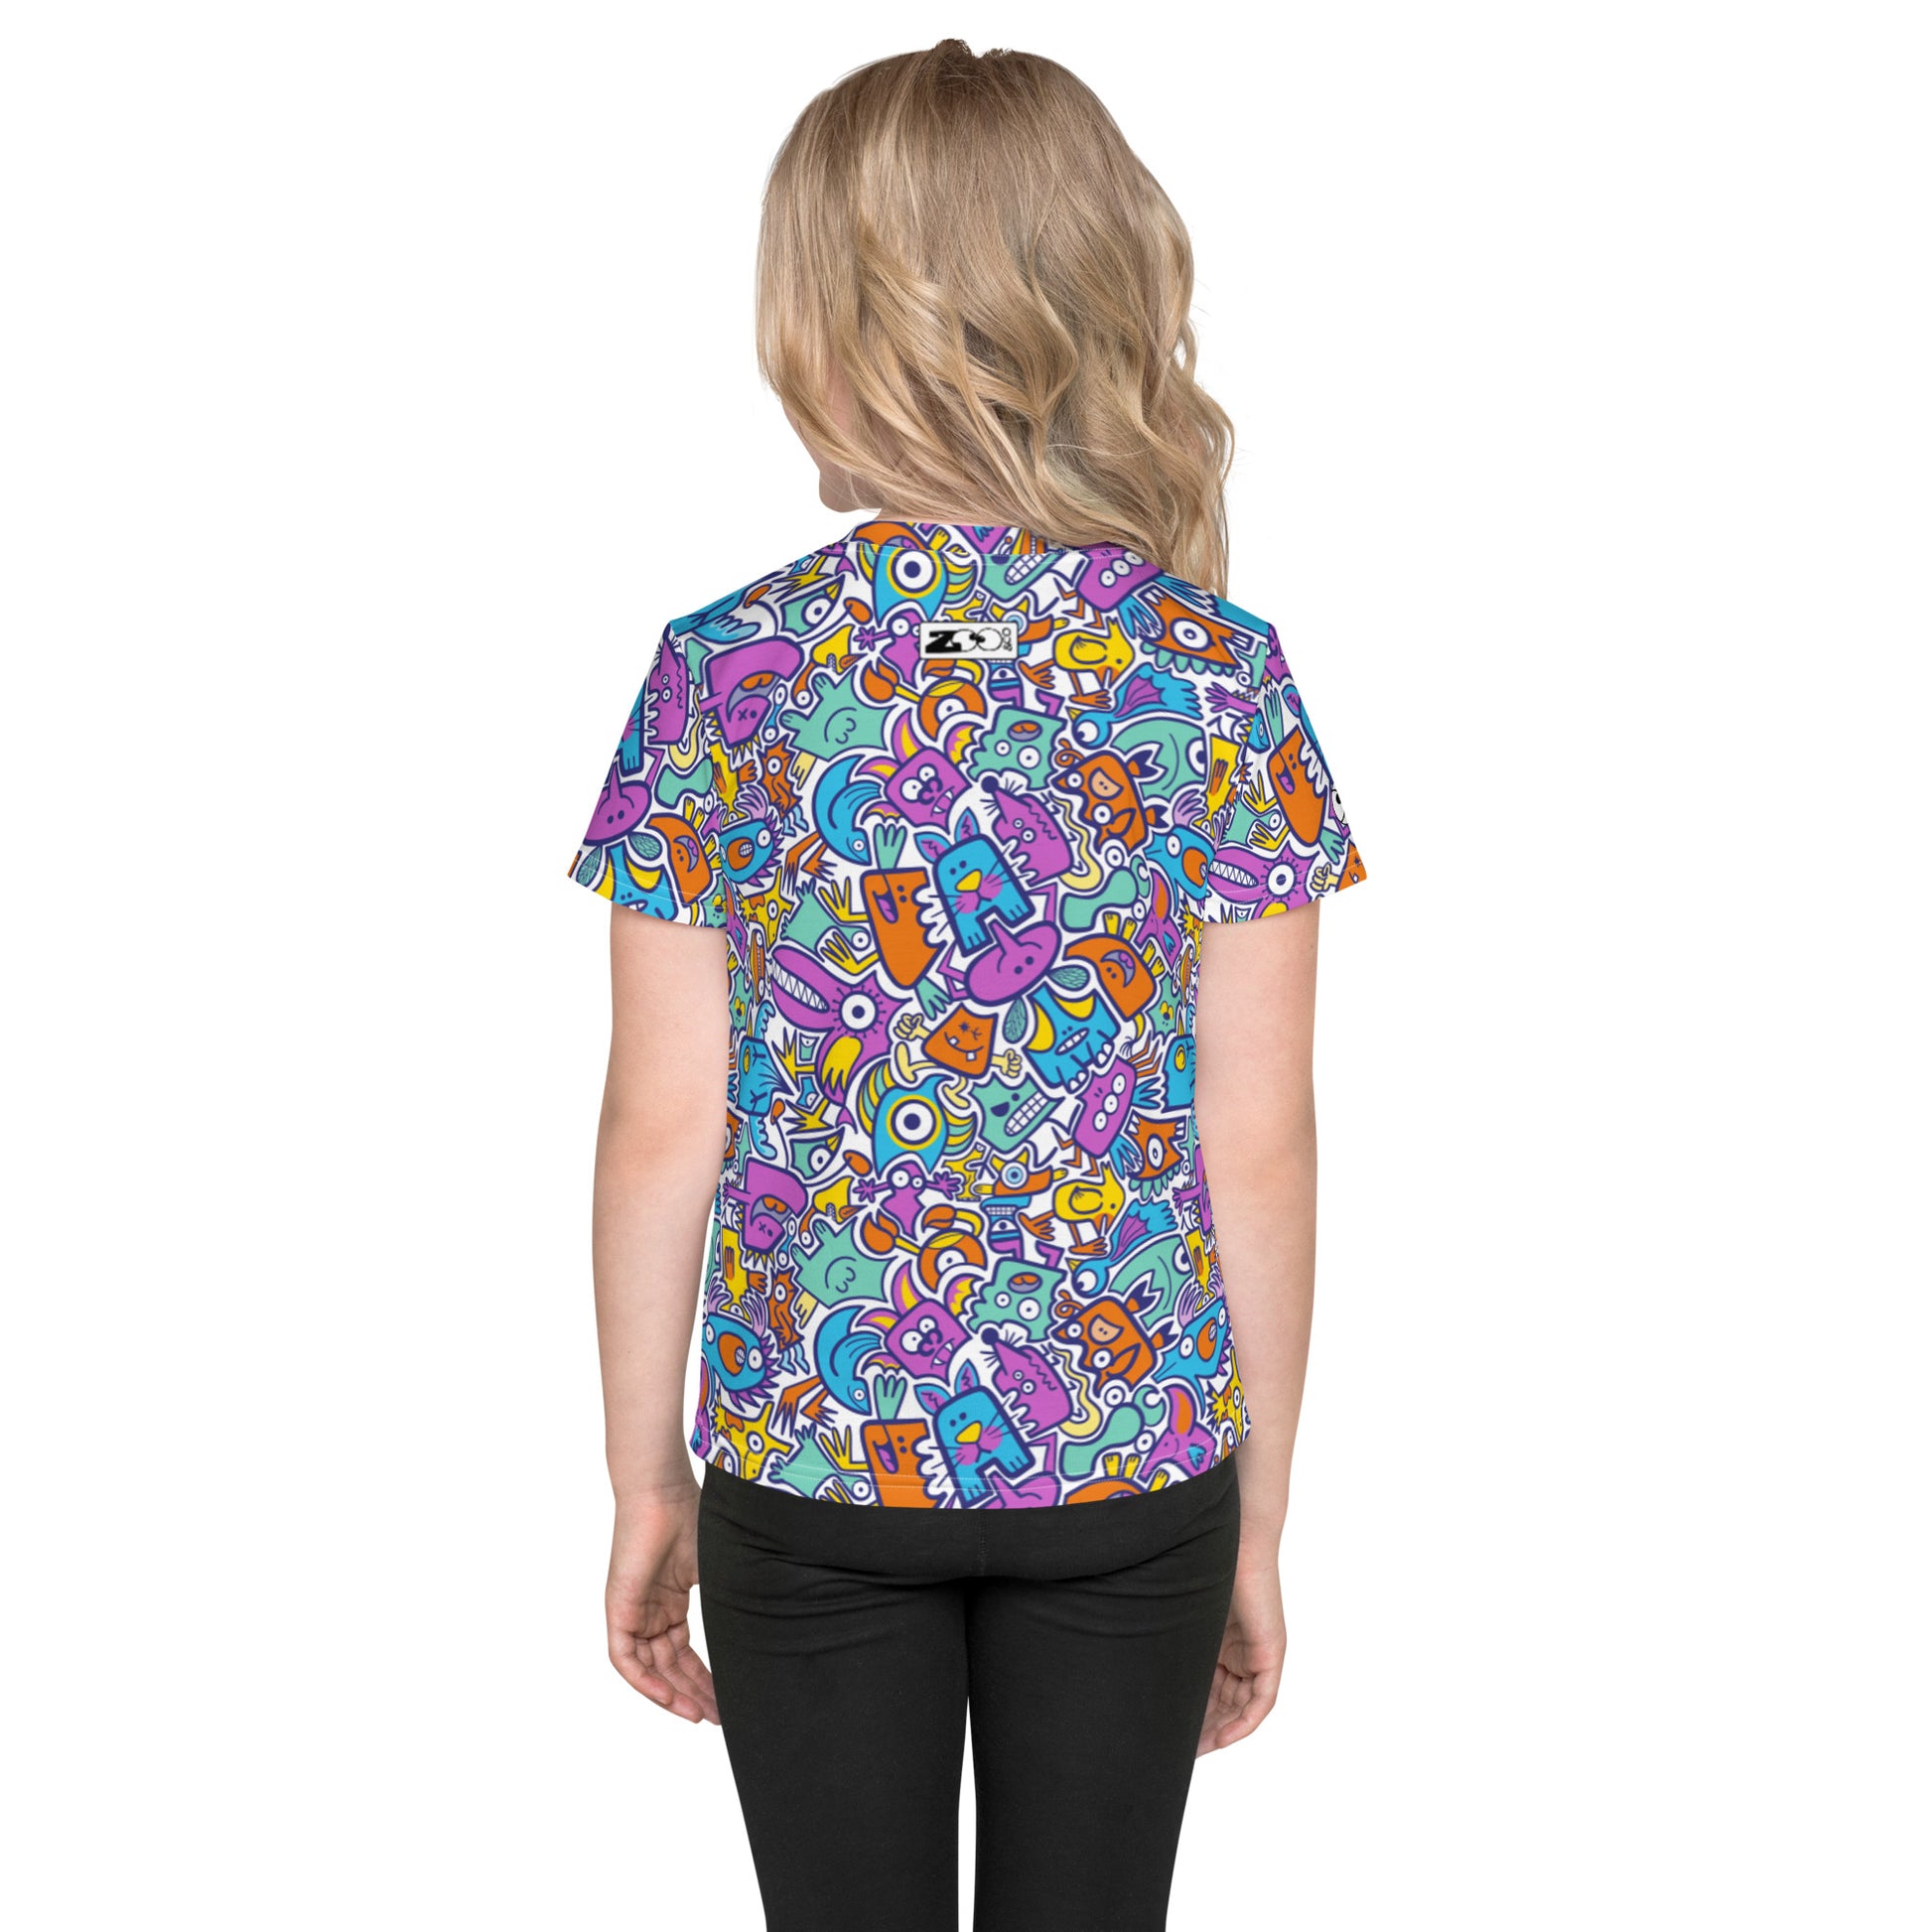 Funny multicolor doodle world All-over print Kids crew neck t-shirt. Back view